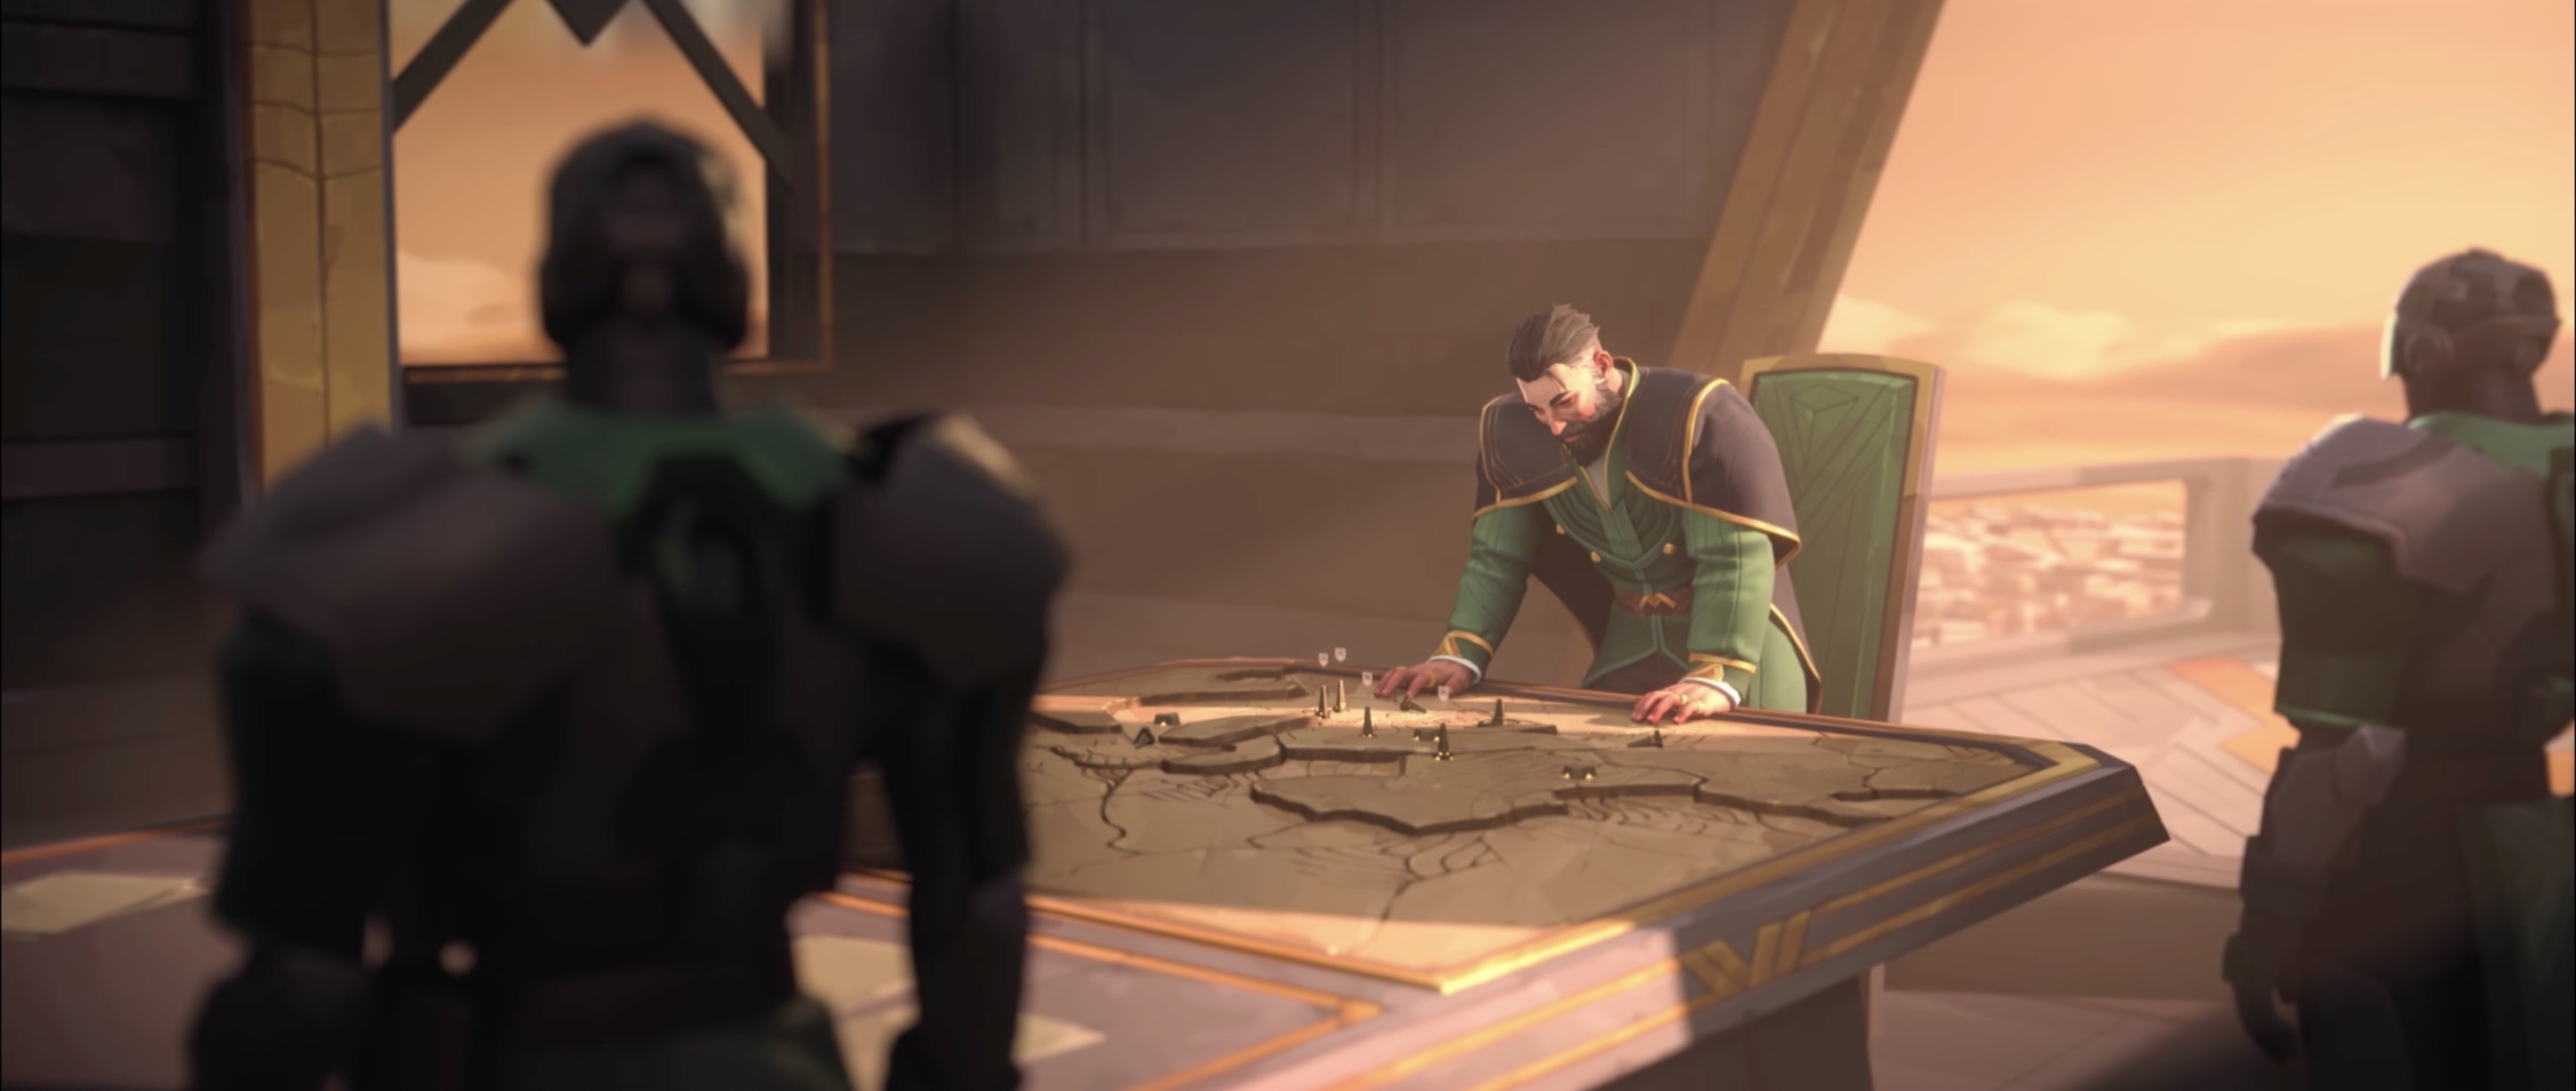 The leader of House Atreides looks over a map table depicting Arrakis in this Dune: Spice Wars screen shot.